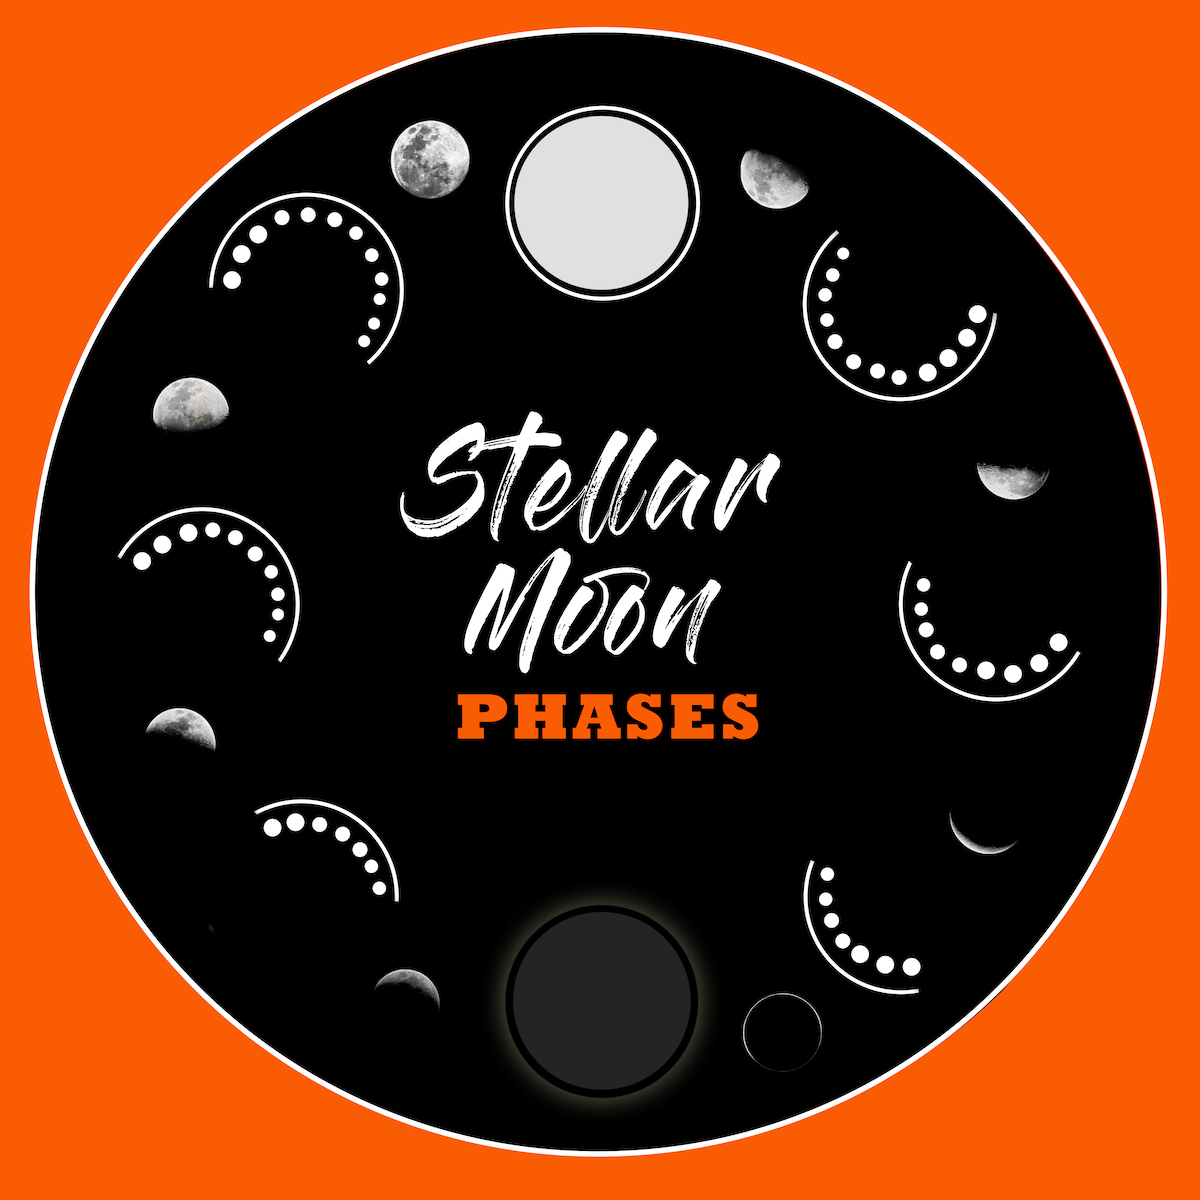 DEBUT ALBUM REVIEW: Phases by Stellar Moon